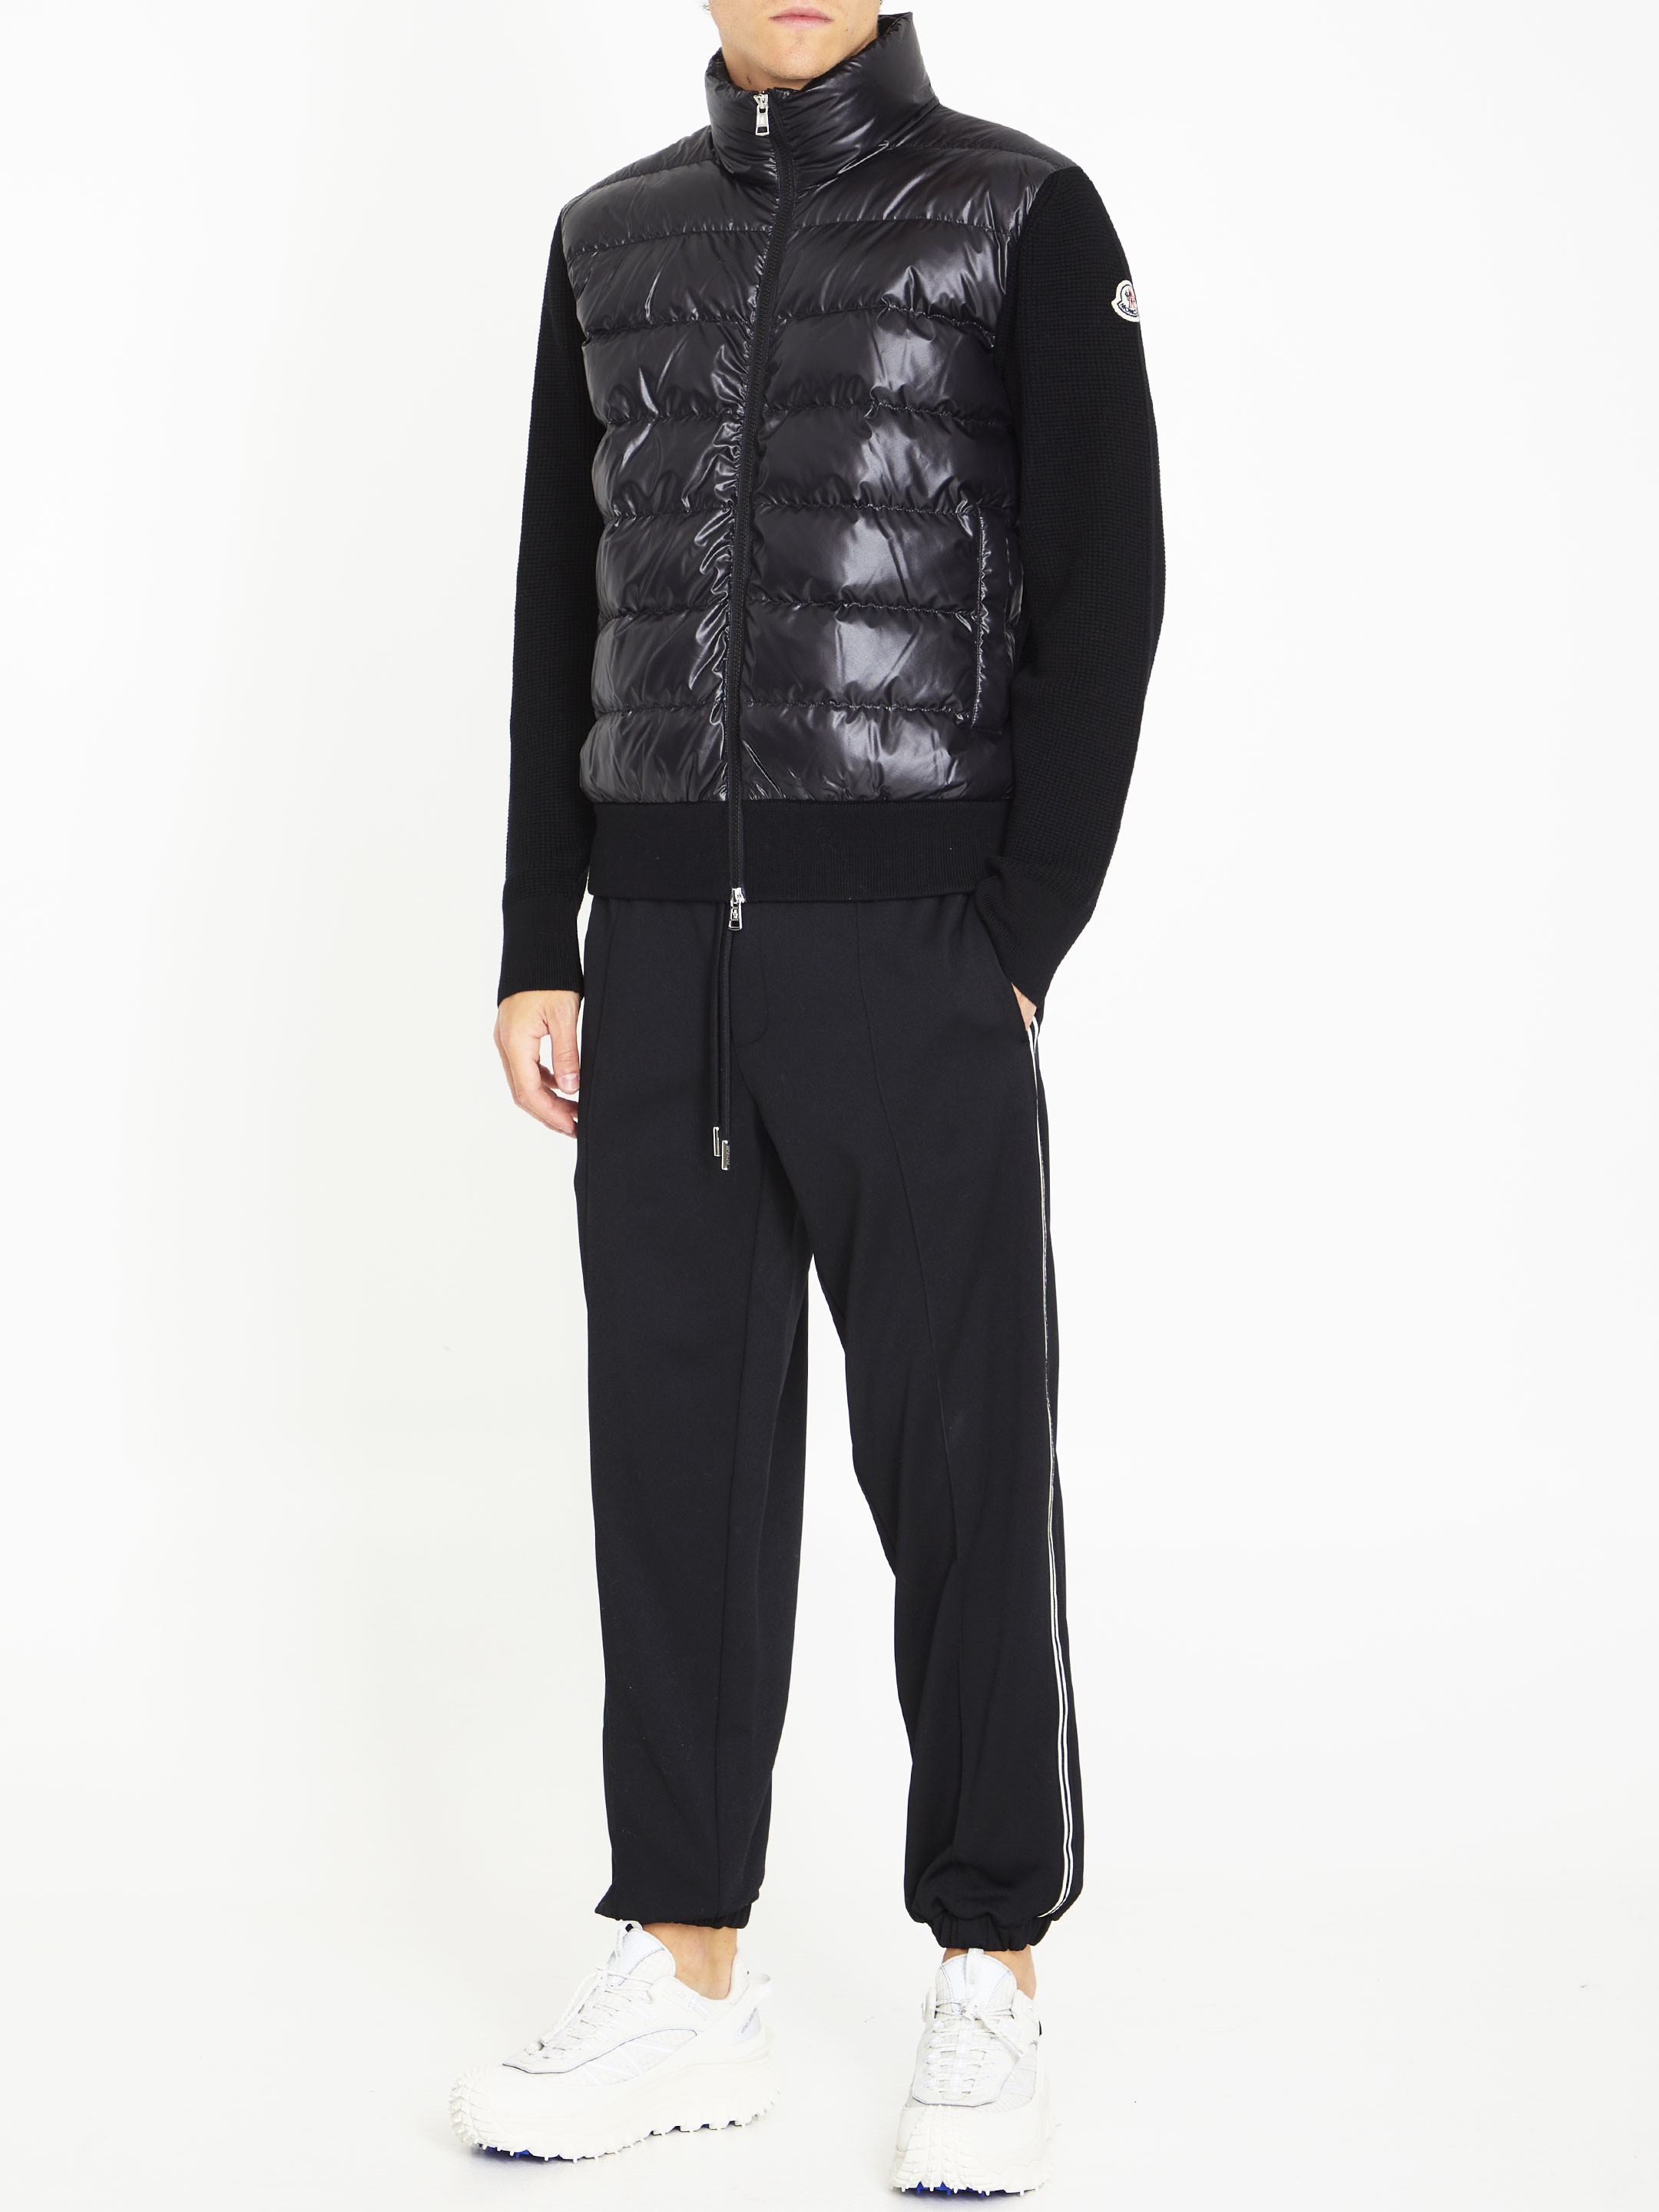 MONCLER - Tricot cardigan | Leam Roma - Luxury Shopping Online